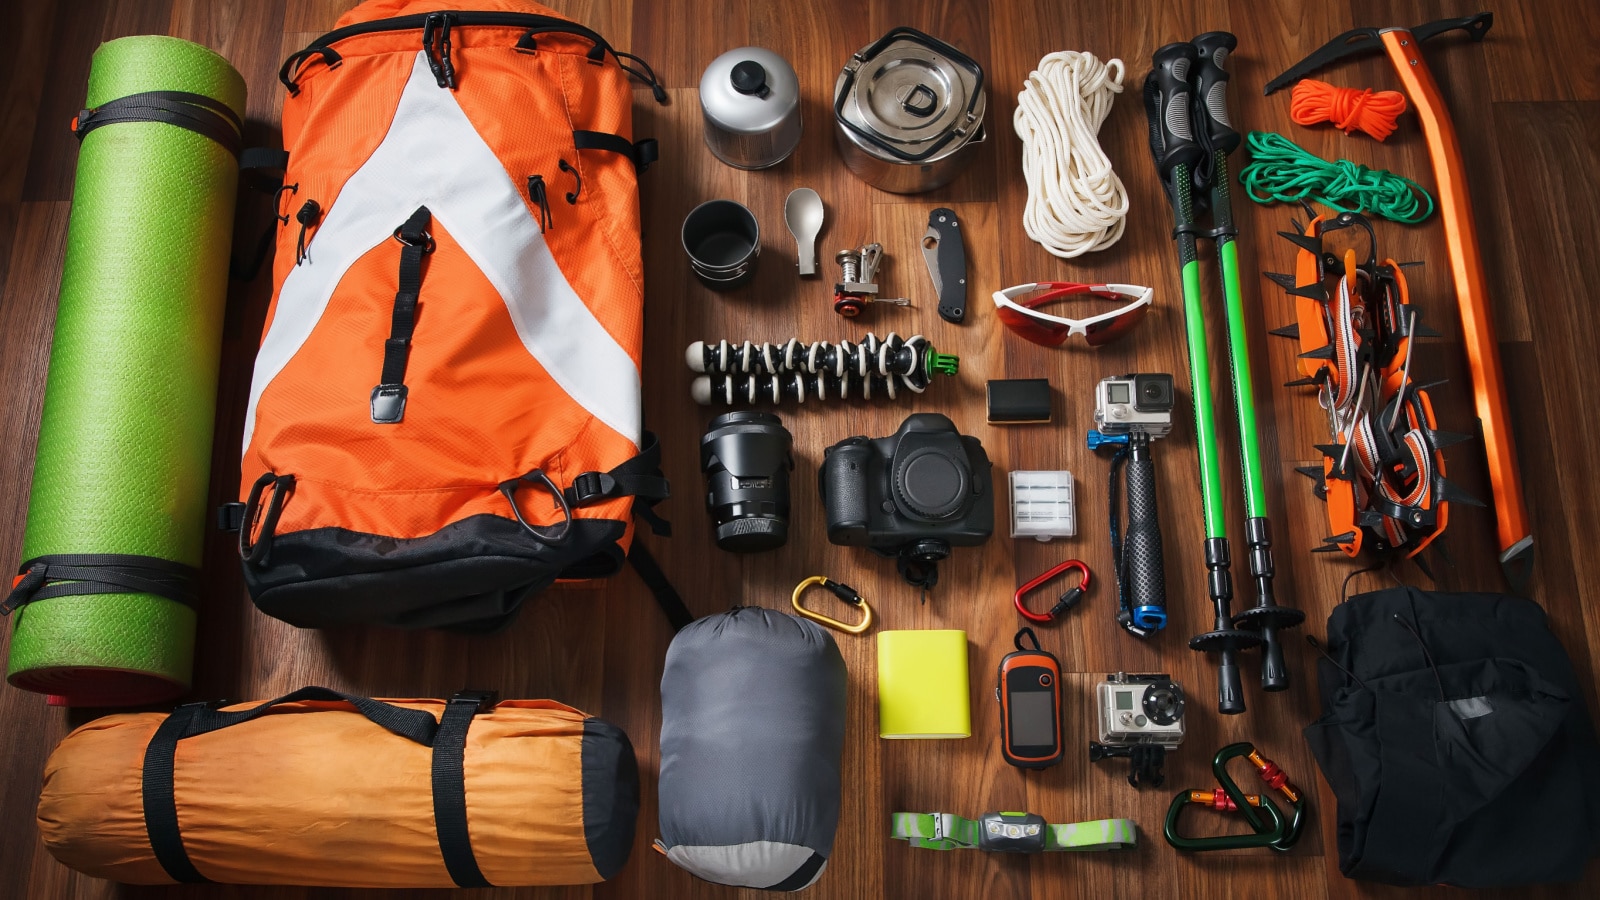 Equipment for mountaineering and hiking on wooden background. Climbing equipment: rope, trekking shoes, crampons, ice tools, ice ax, ice screws, red knife and other set on dark wooden background.